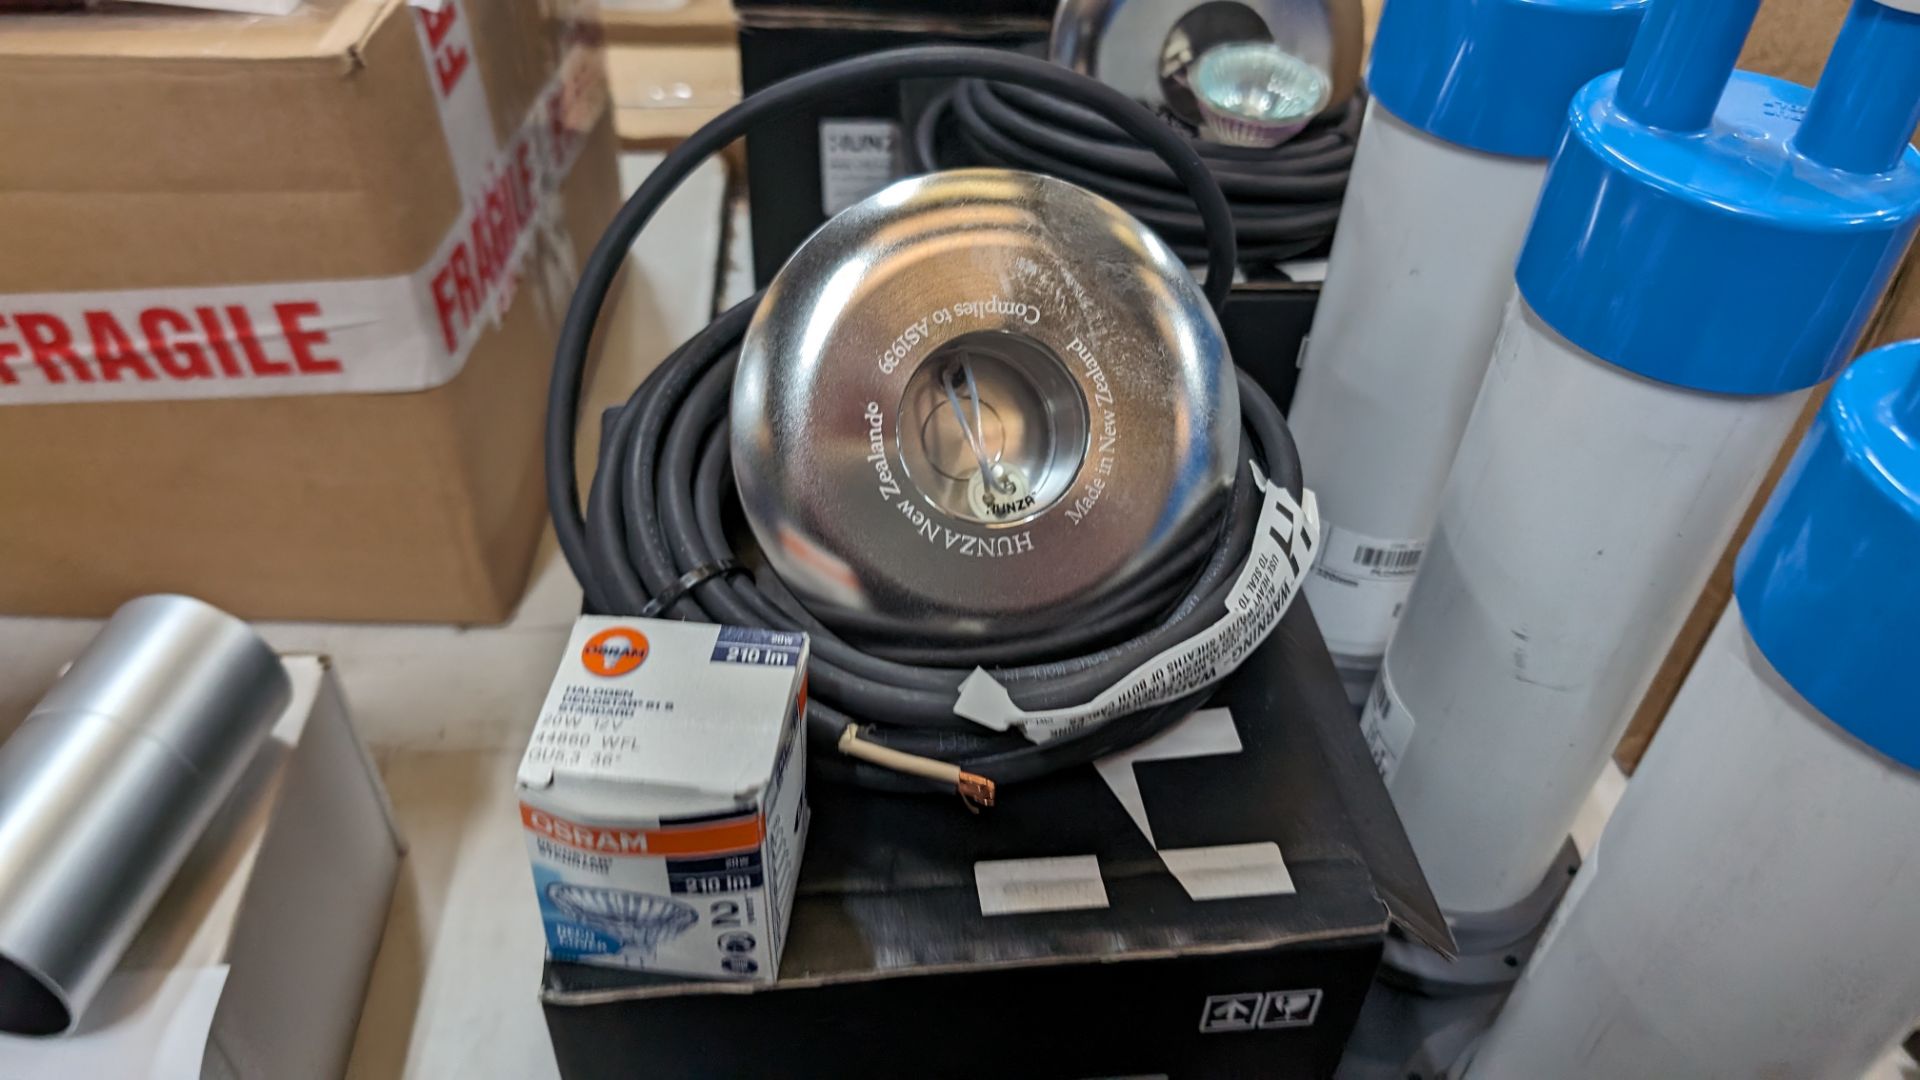 5 off Hunza stainless steel pool lights, including 5 off Hunza and other pool light canisters - Bild 6 aus 12